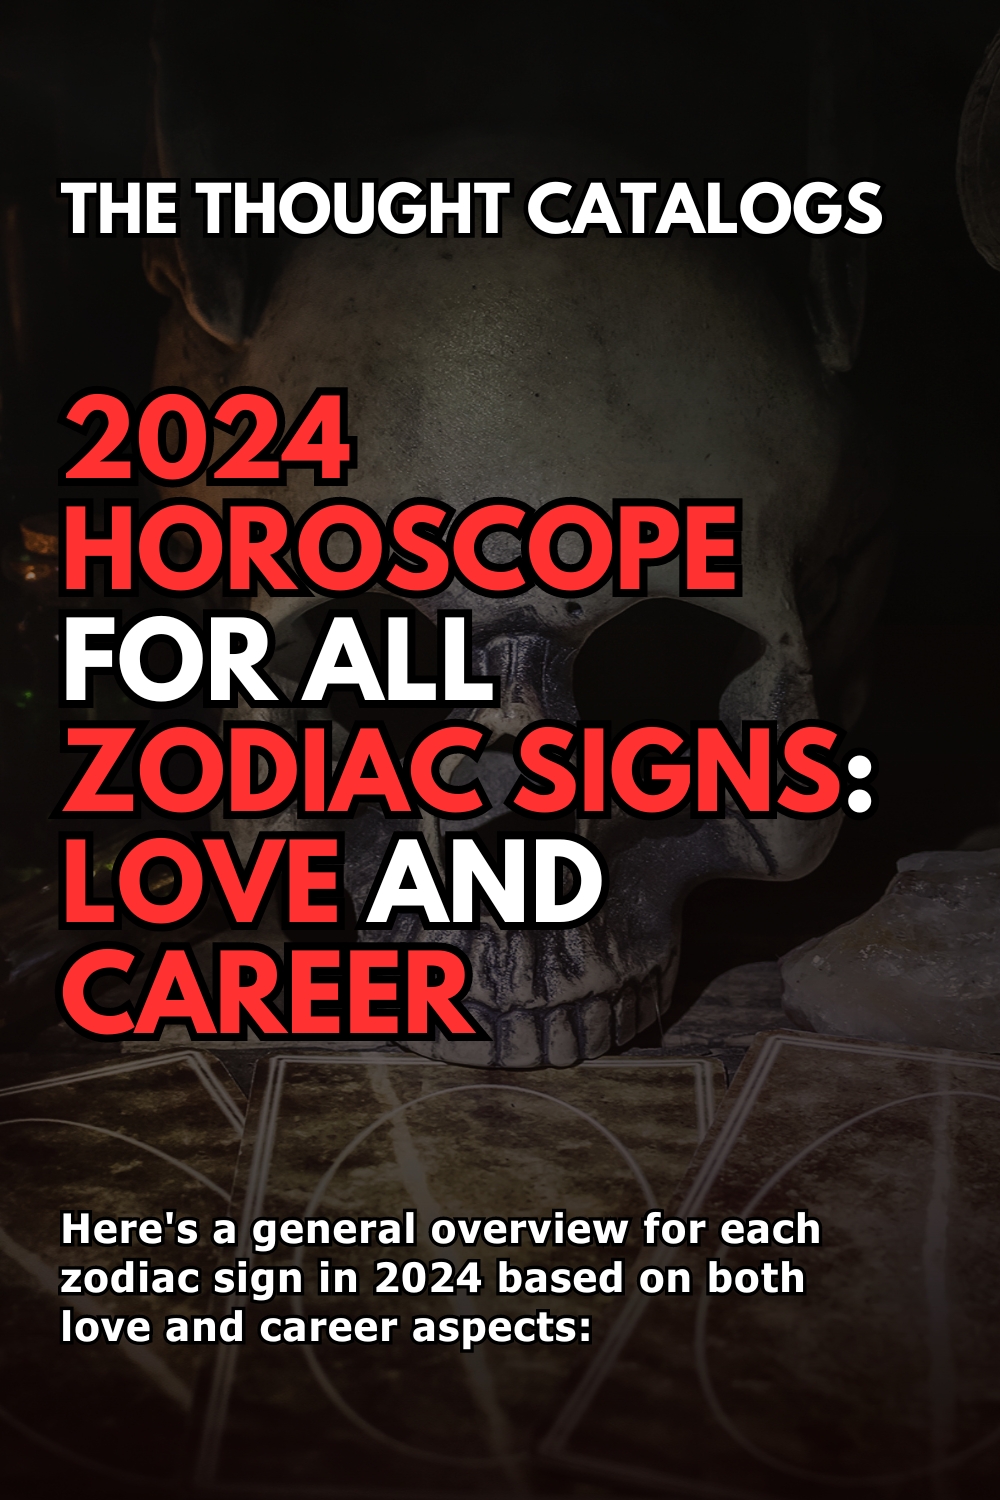 2024 Horoscope For All Zodiac Signs: Love And Career, Based On Your Zodiac Sign